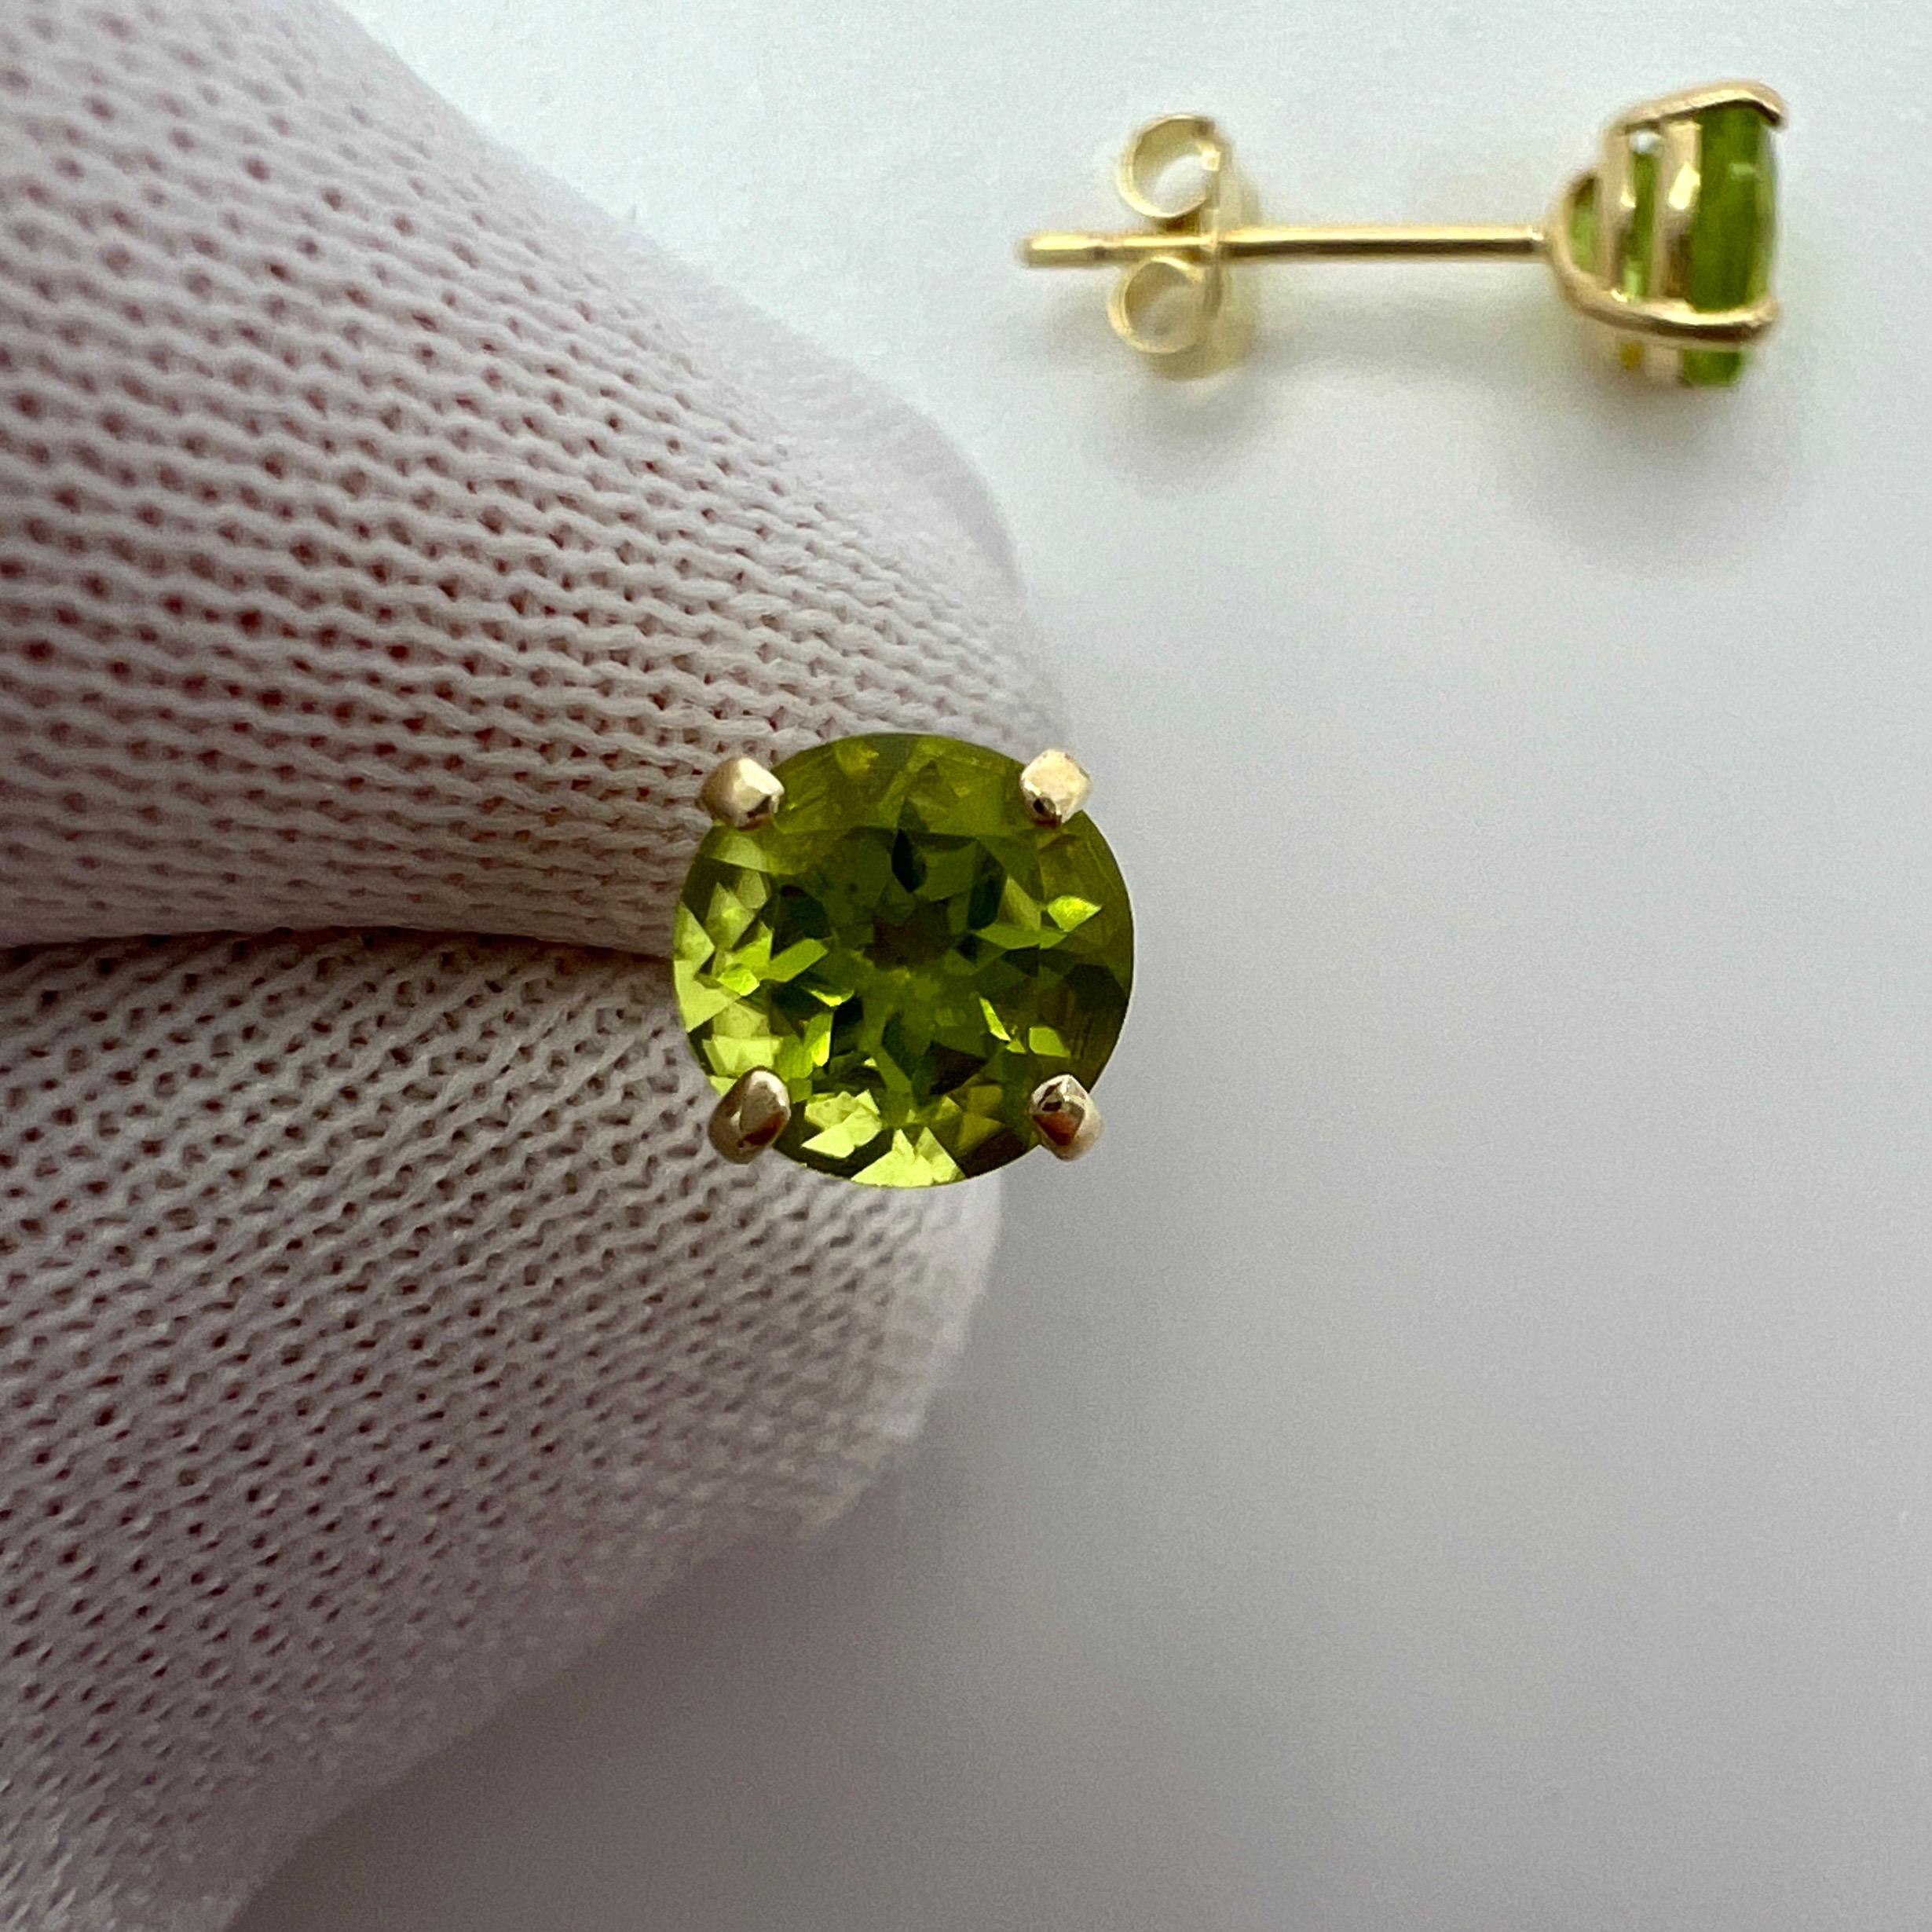 Natural 1.00ct Vivid Green Peridot 9k Yellow Gold Round Cut Earring Studs.
 
Beautiful 5mm matching pair of round peridot's with vivid green colour, excellent clarity and an excellent round brilliant cut. 

The gemstones may vary slightly from the